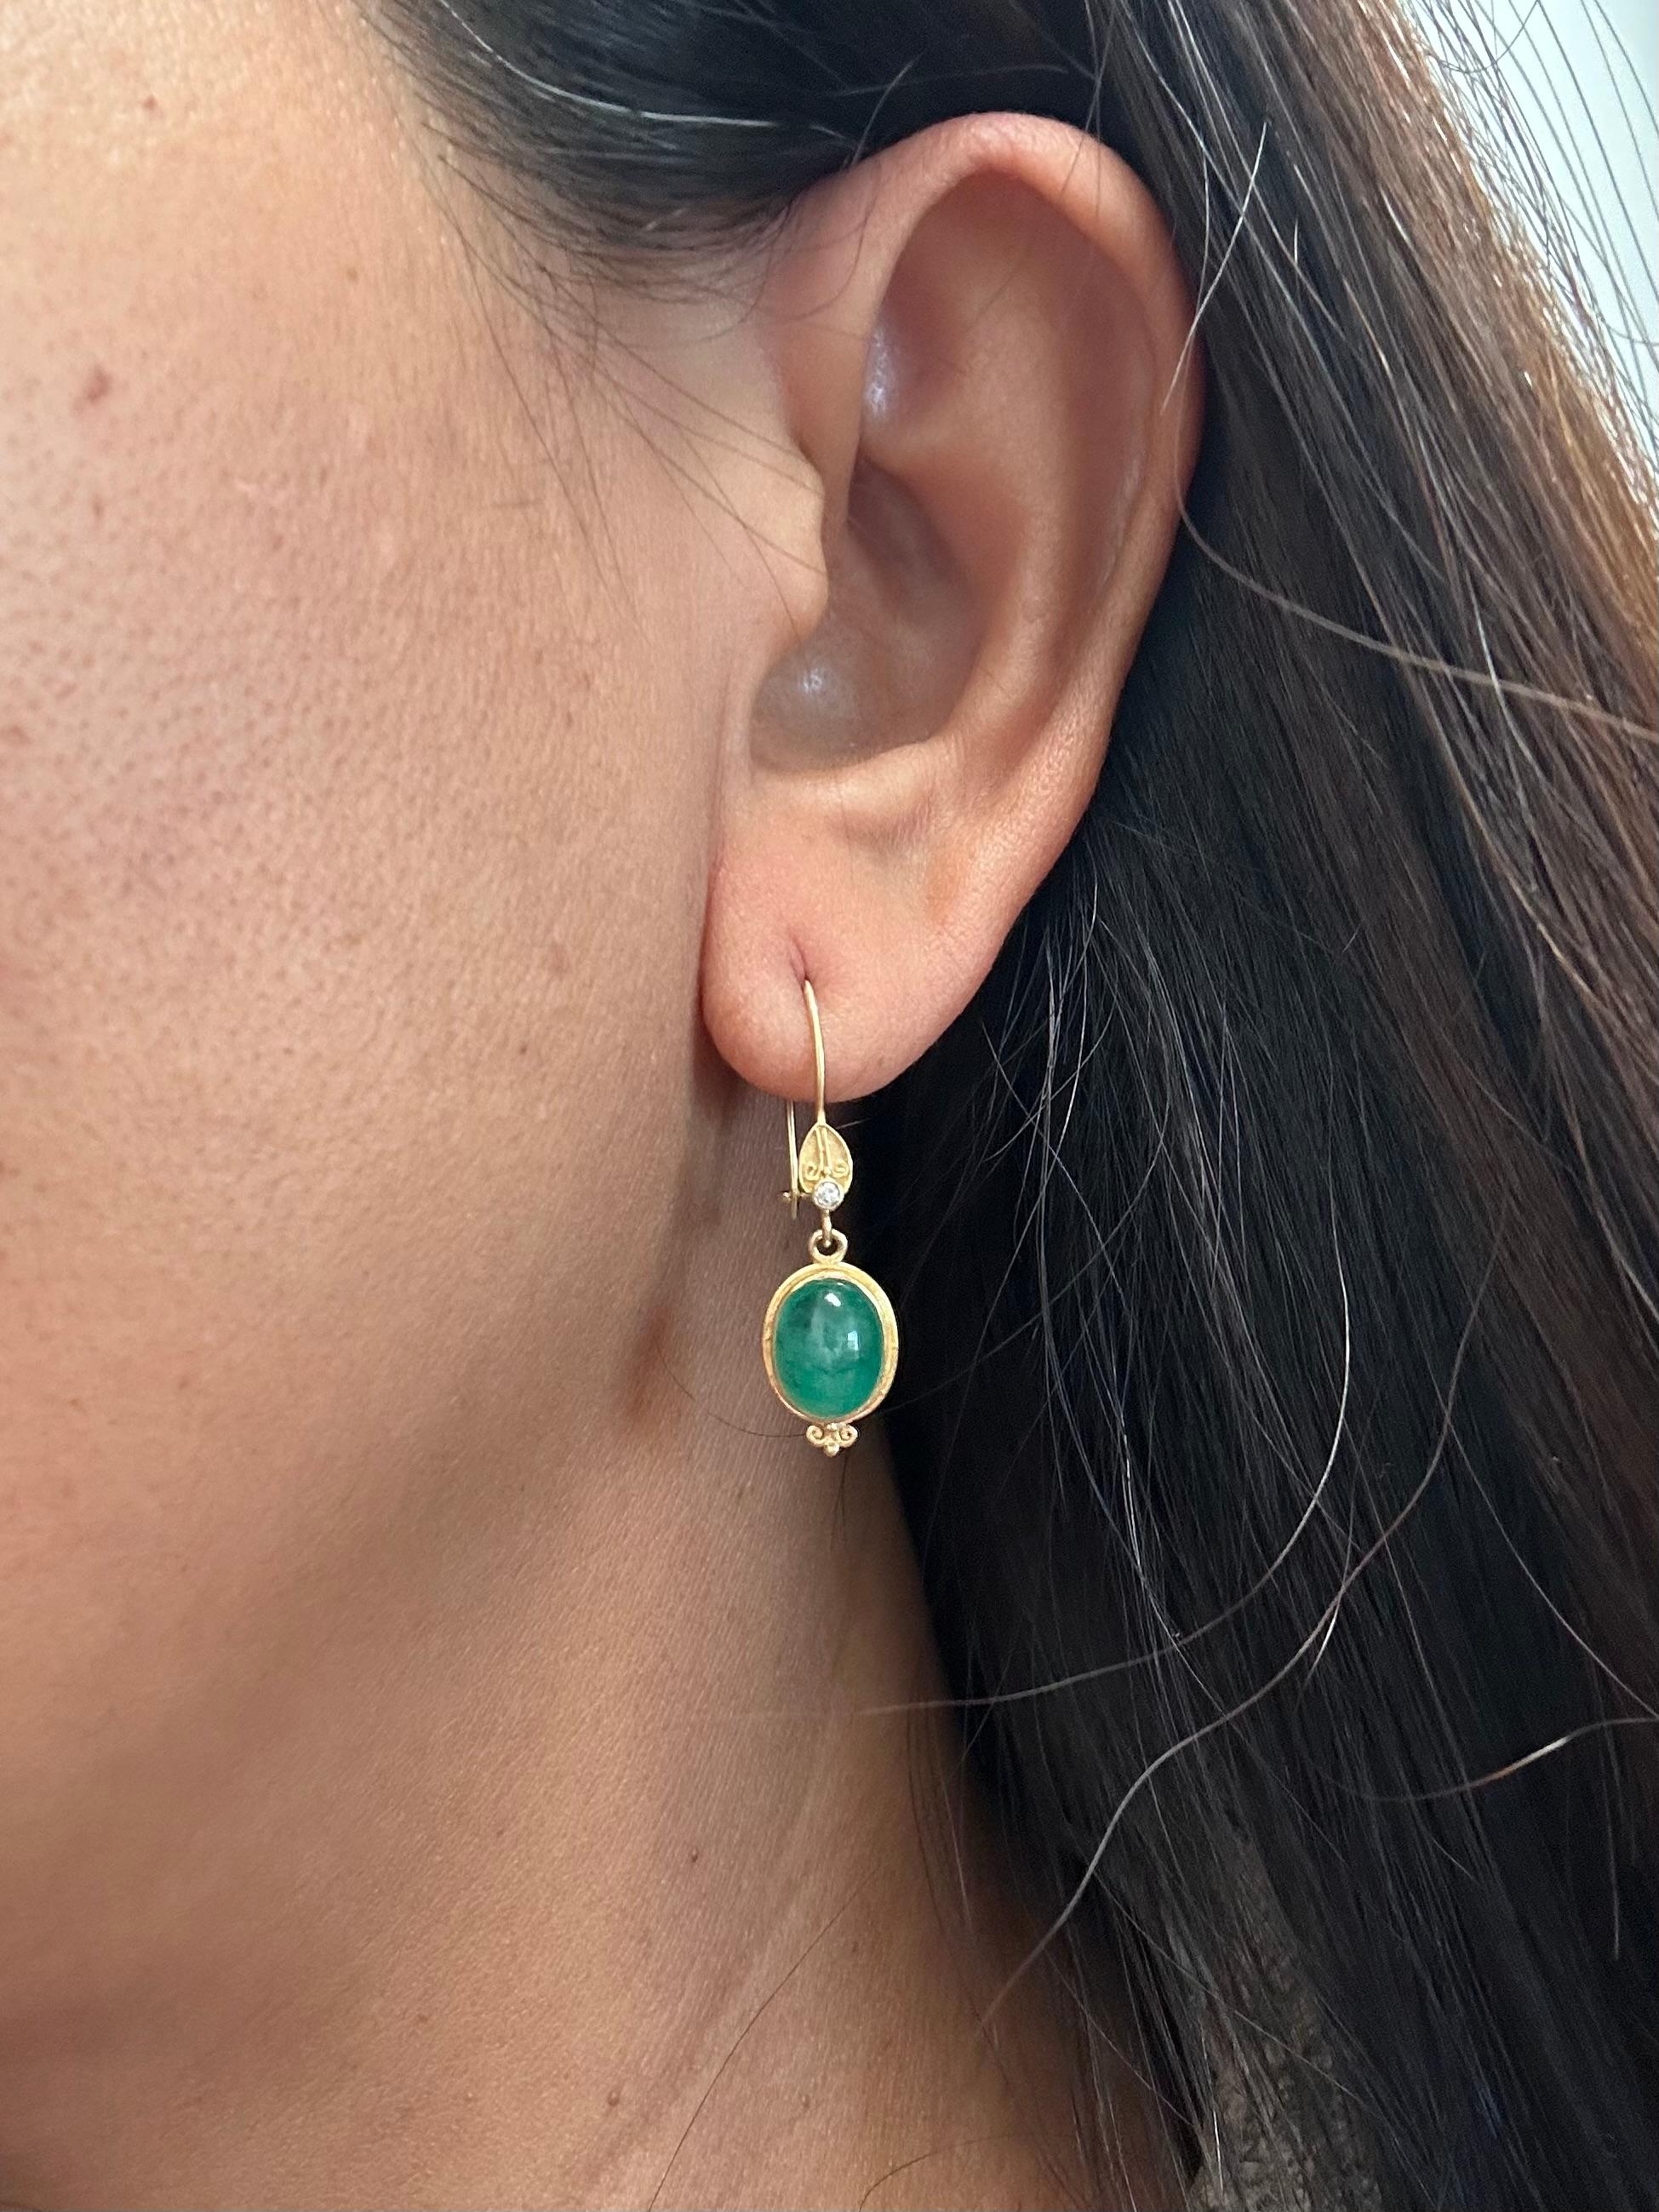 Two deep green 7 x 9 mm oval Zambian emerald cabochons are held in handmade 18K bezels surrounded by enhancing wires that end in a double scroll motif at the bottom.  At the top of the safety clasp wires, a small component with delicate